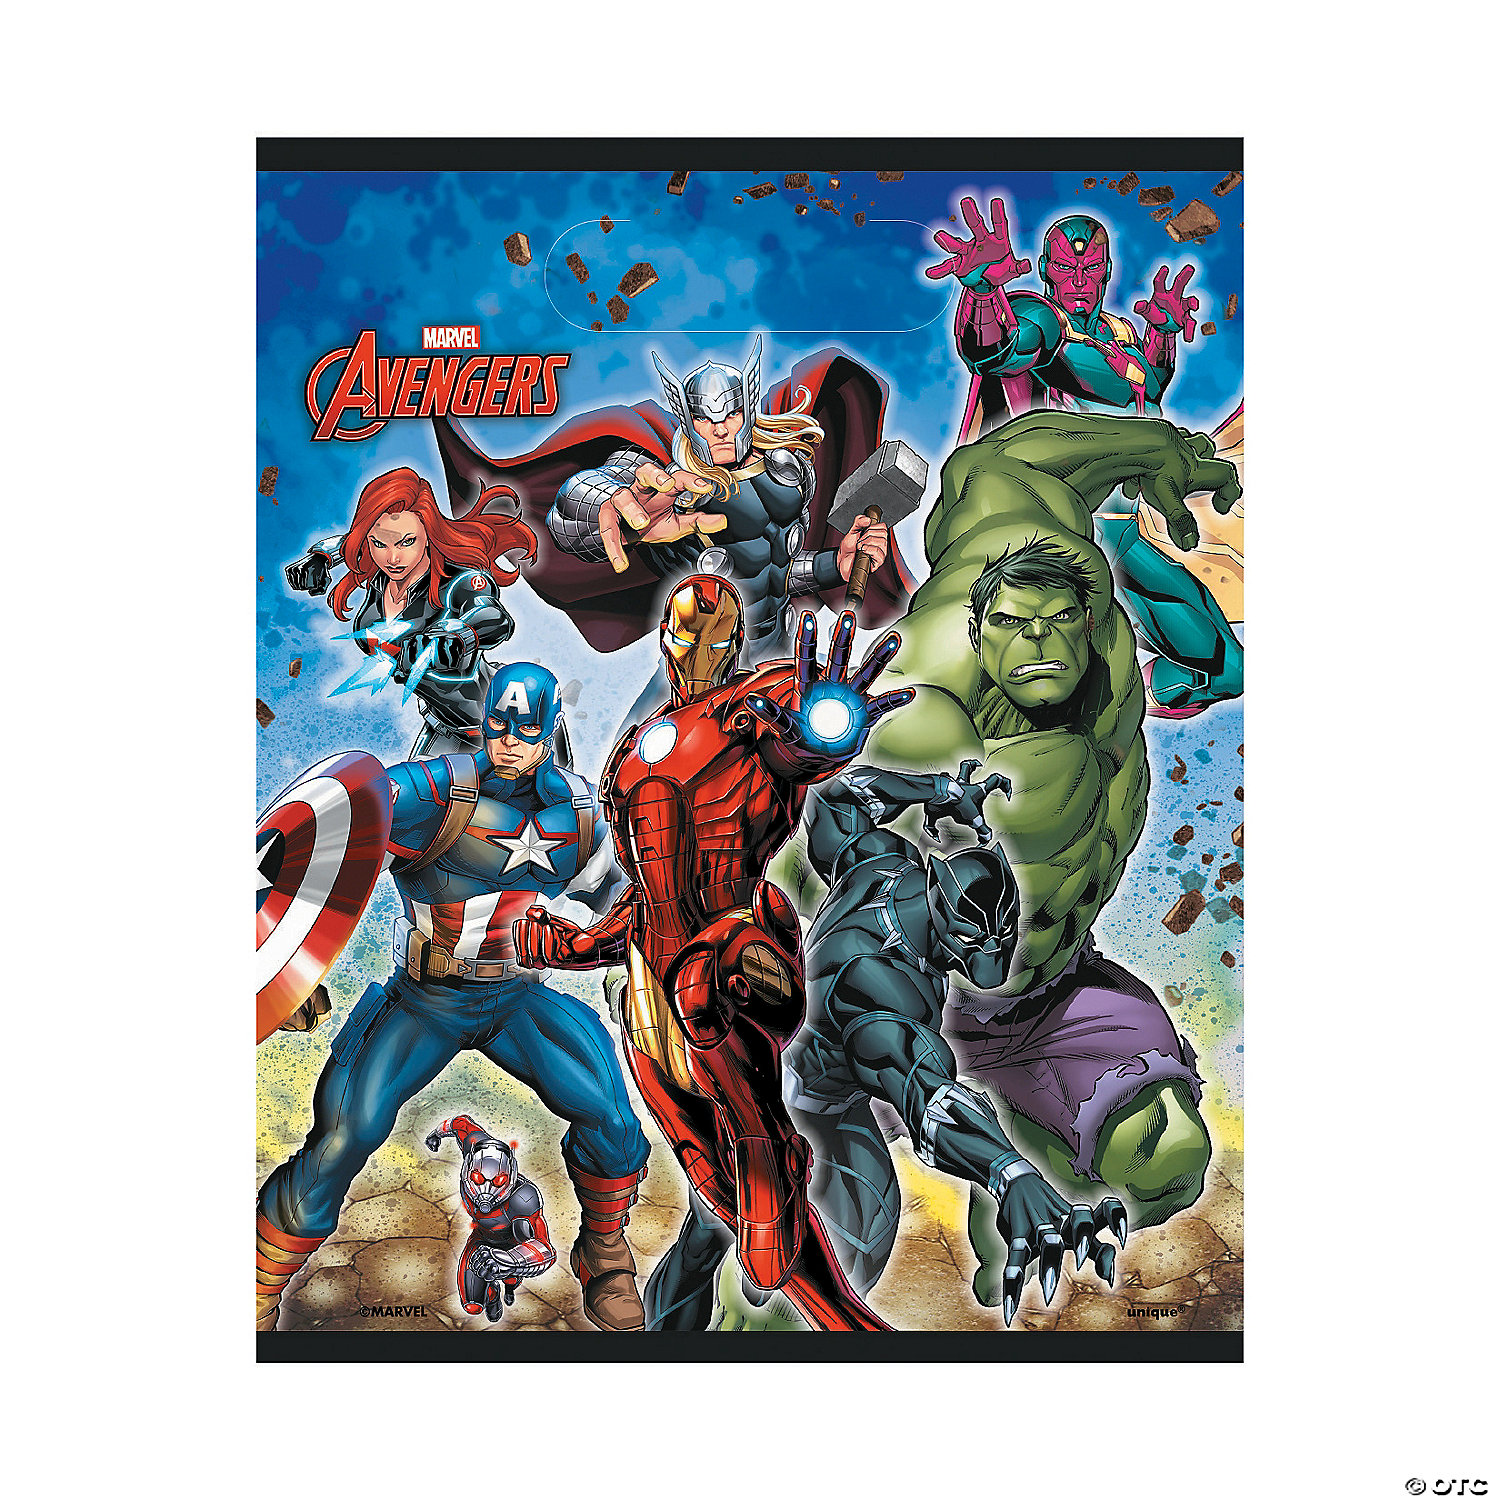 Hulk Stickers x 5 Party Supplies Birthday Loot Bags Ideas Avengers Marvel Comic